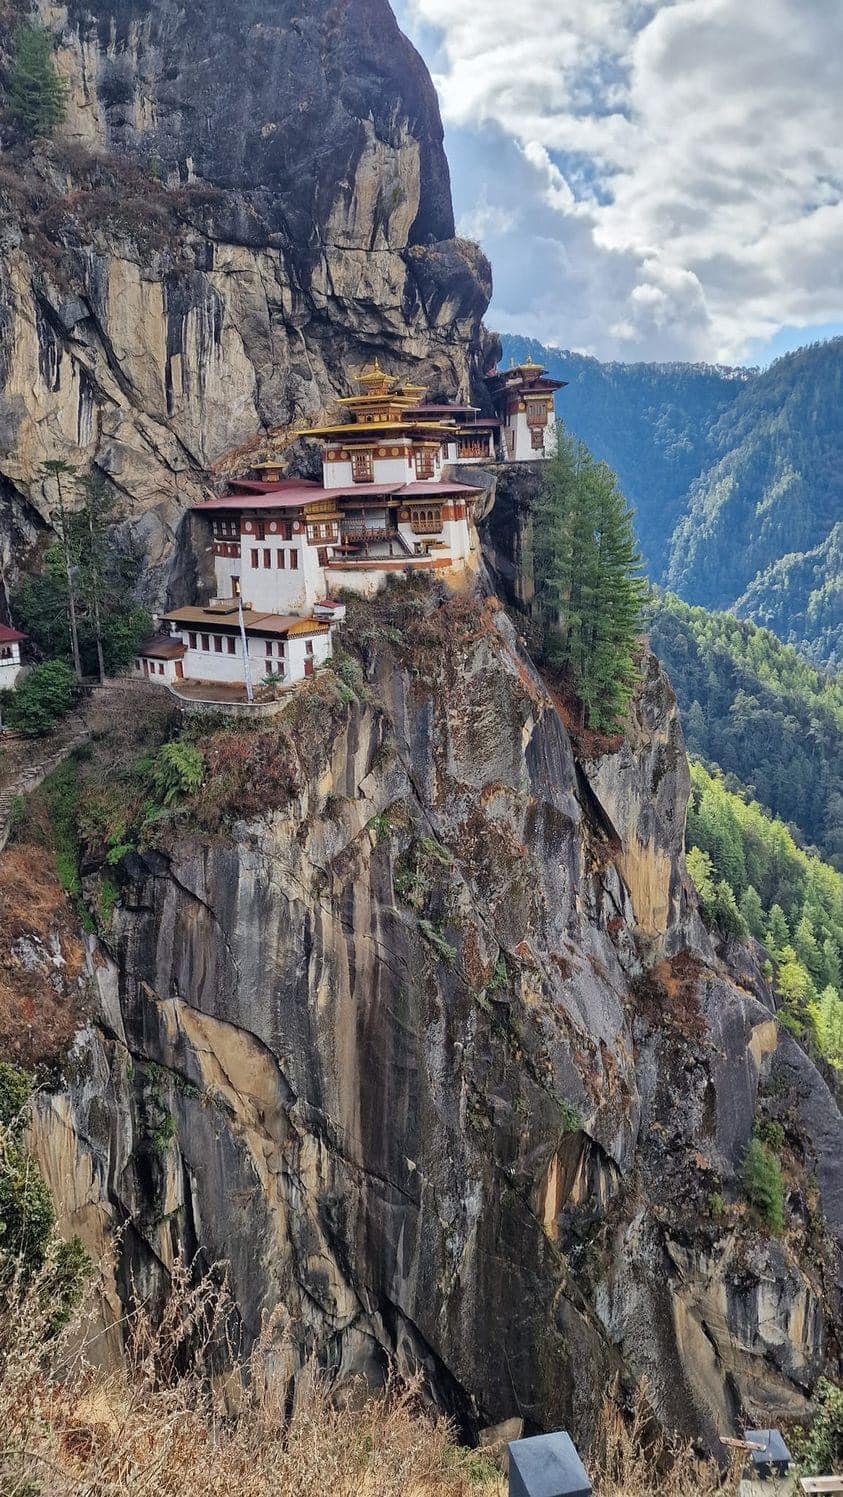 Tiger's Nest Monastery, Also Known As Paro Taktsang, Is A Sacred Buddhist Site Located In The Cliffside Of The Paro Valley In Bhutan